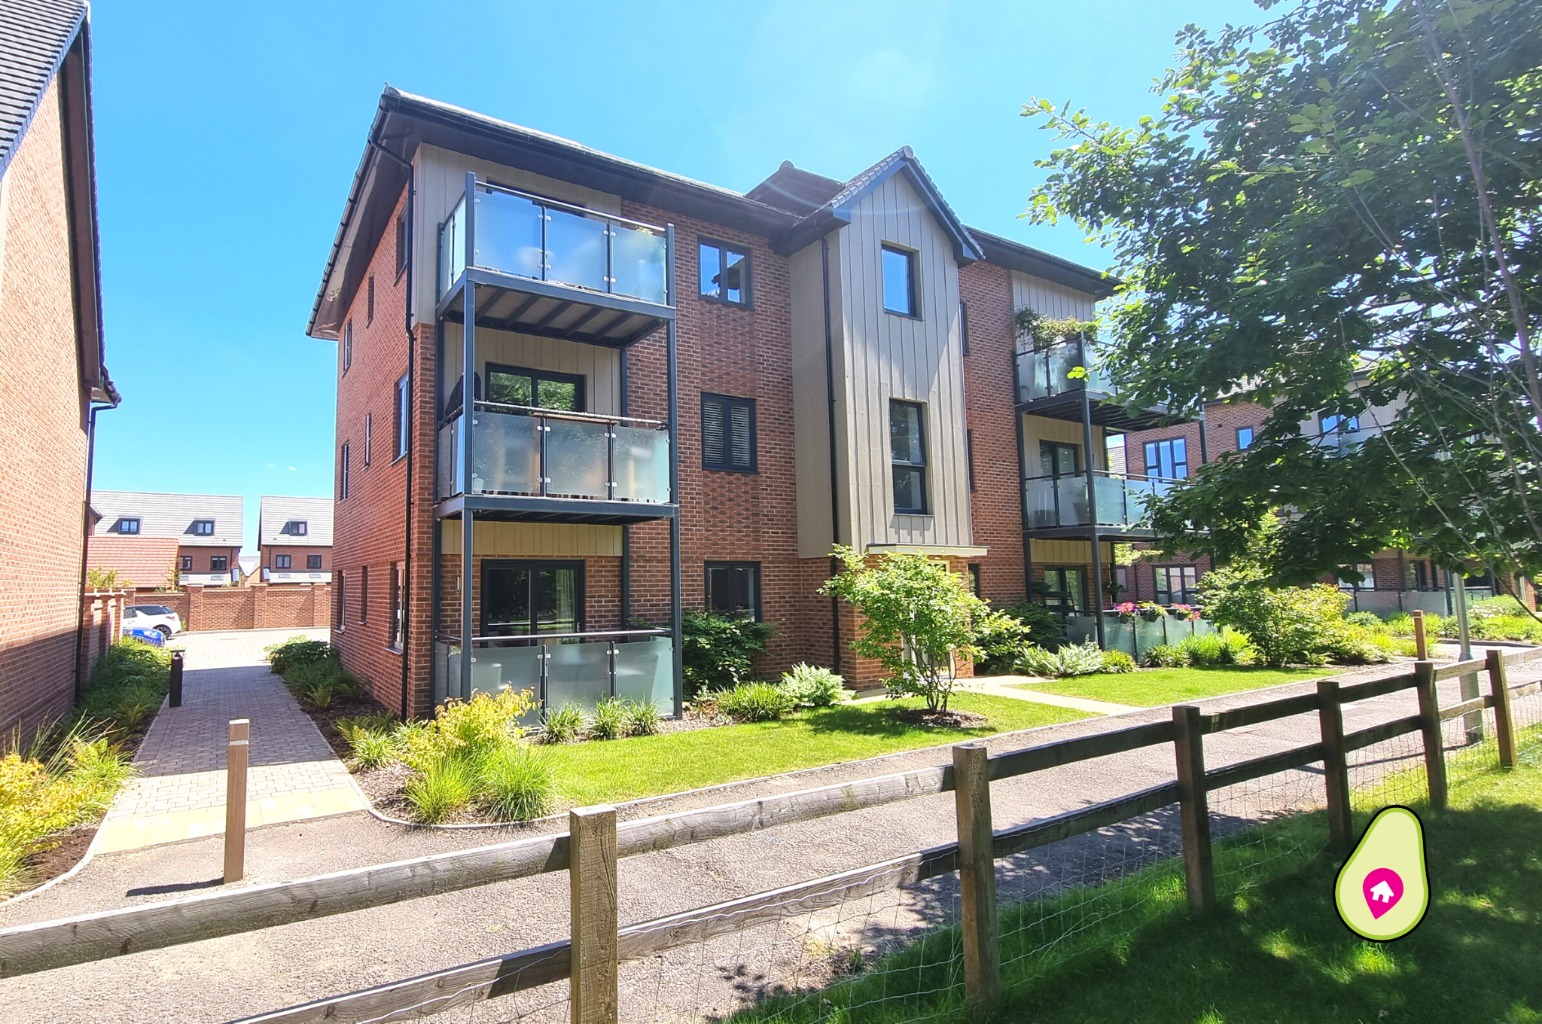 This Impressive high specification apartment with Bucklers Forest on the doorstep has so much to offer, whilst being within walking distance of Crowthorne High Street. Having been built in 2019 by Legal and General Homes, it really is in immaculate condition throughout and has a private balcony